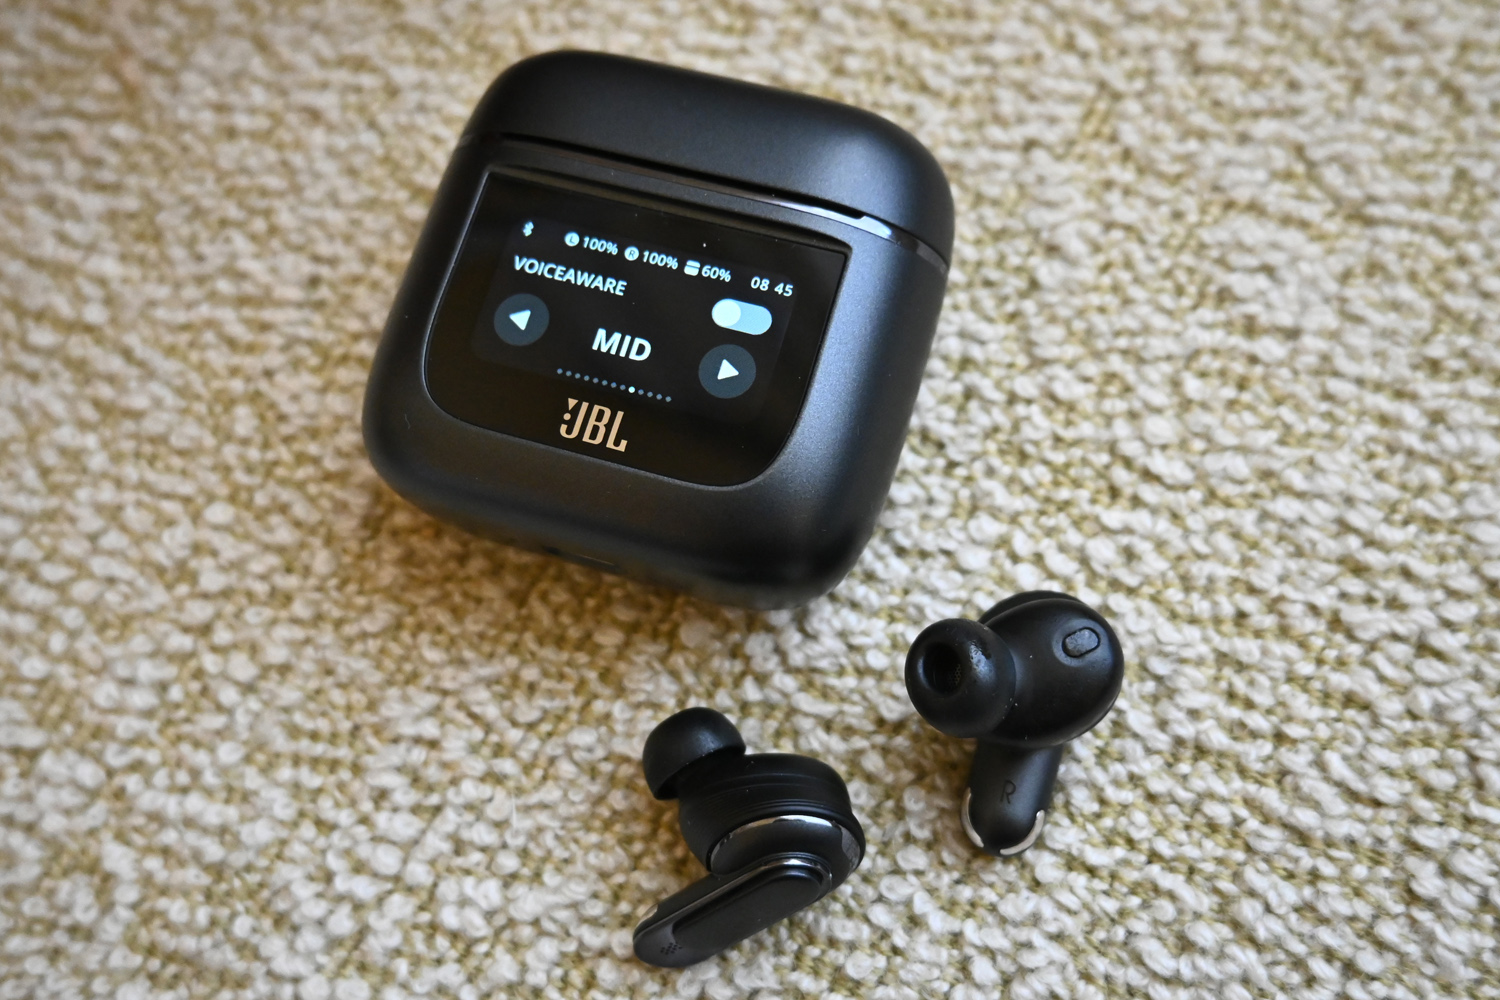 JBL Tour Pro 2 hands-on: Putting earbud controls on a touchscreen case, jbl  tour pro 2 